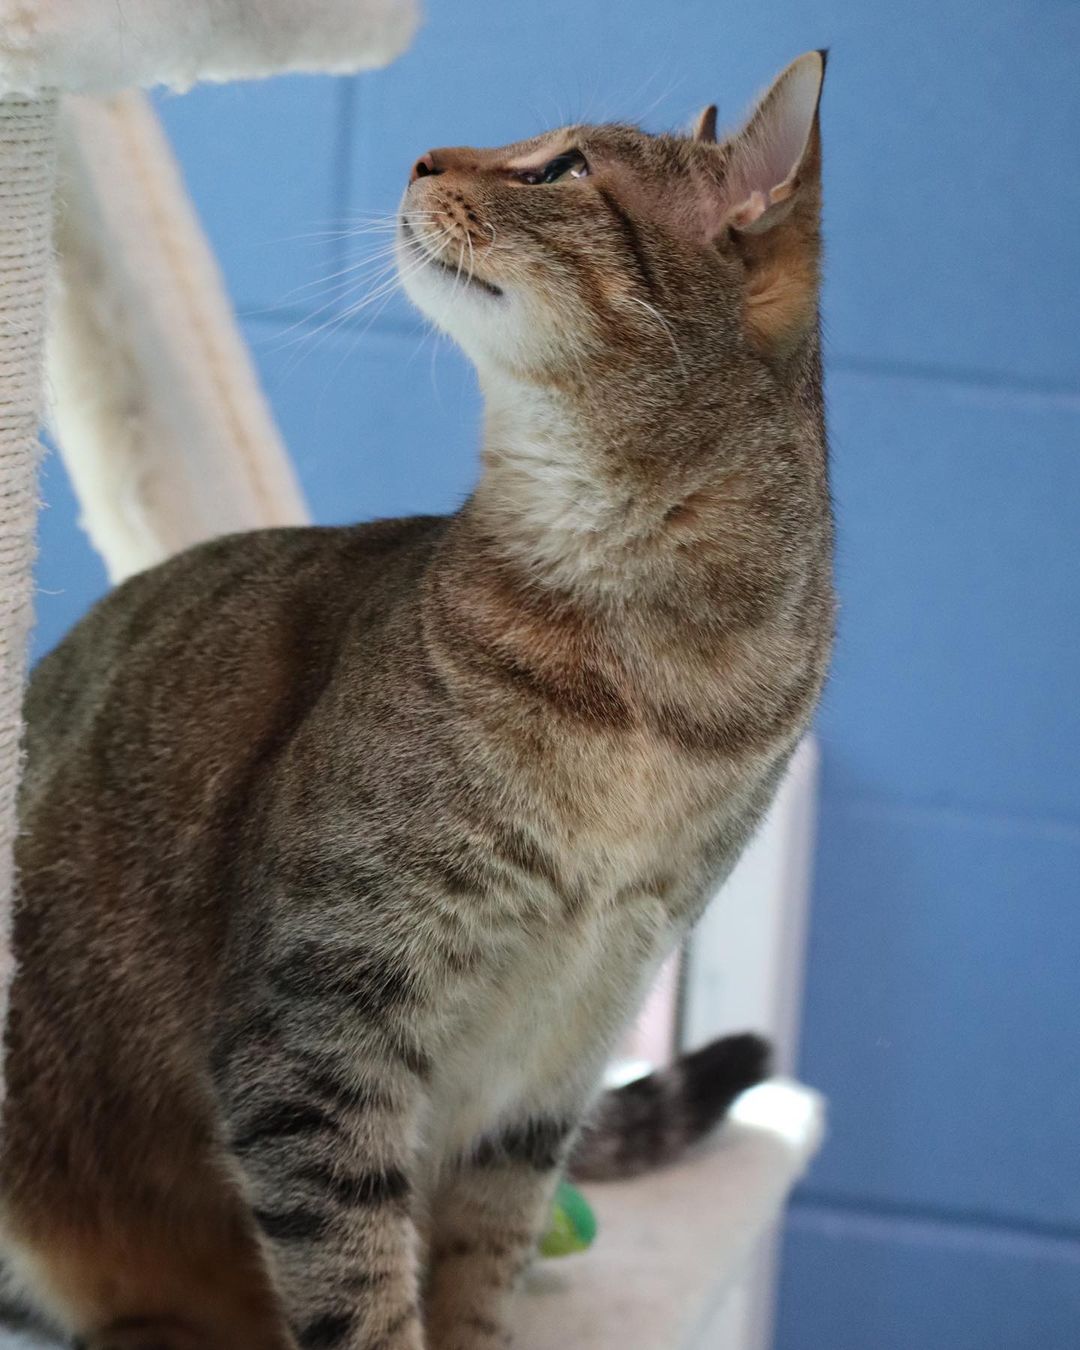 With cats like Monkey, sometimes the name fits a little too well 🙈

The name really says it all with this guy. He’s playful, goofy, mischievous, and loving just like any good monkey 🐒 

Stop by from 12-6 to meet everyone’s favorite cat tree crawler 🐵

🙈🙉🙊 pethelpers.org 🙈🙉🙊